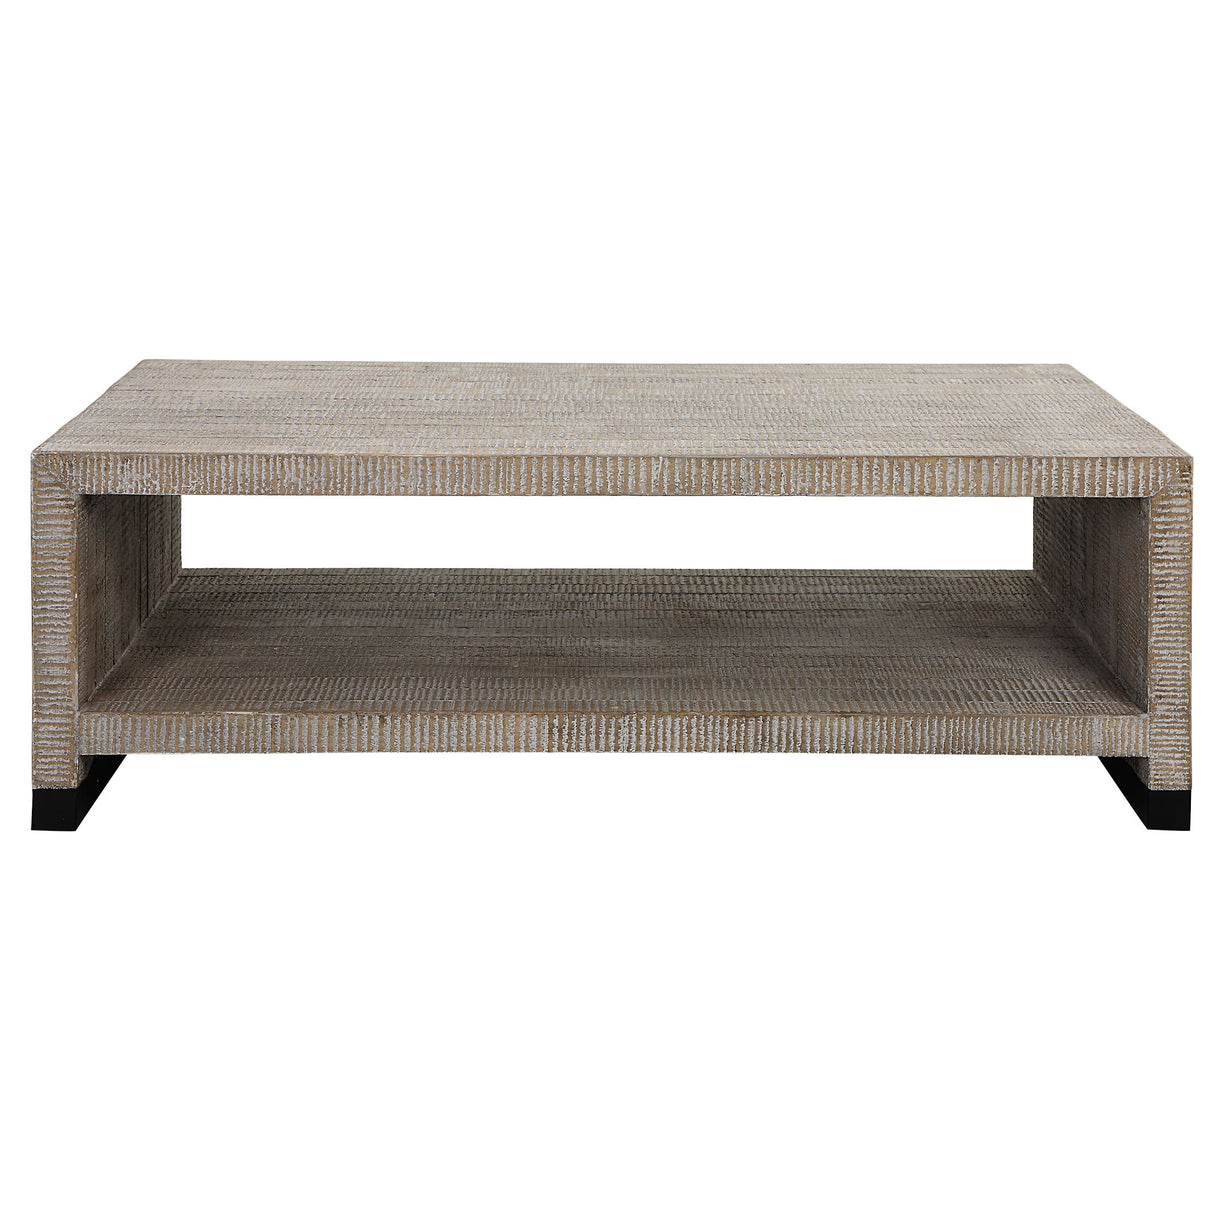 Bosk - White Washed Coffee Table